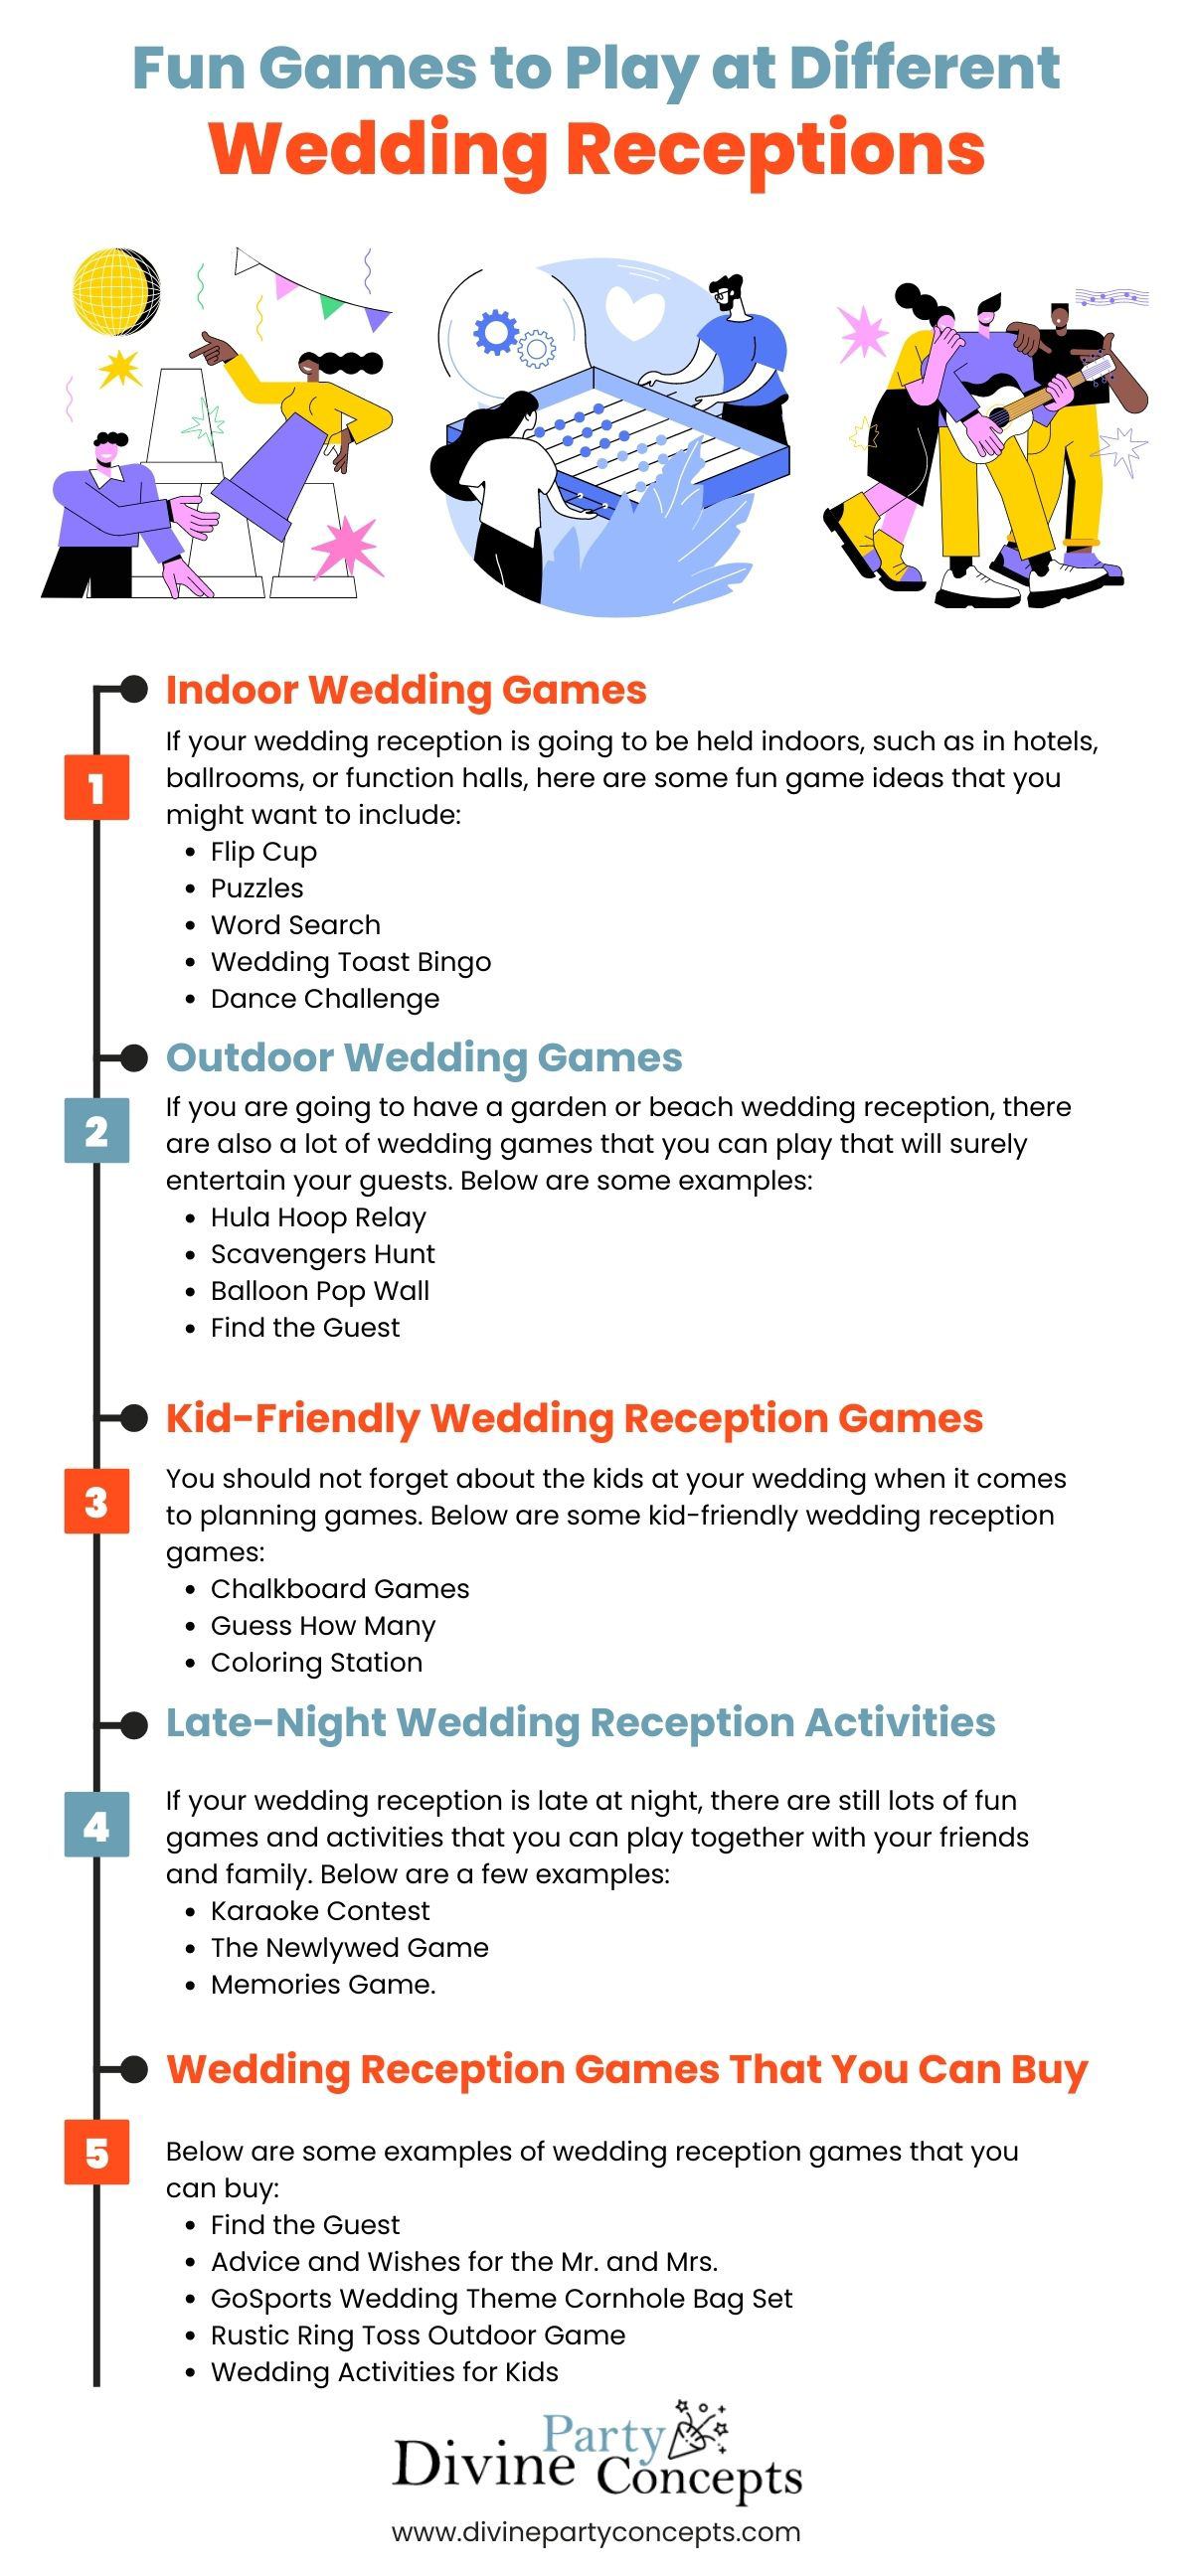 Fun Games to Play at Different Wedding Reception